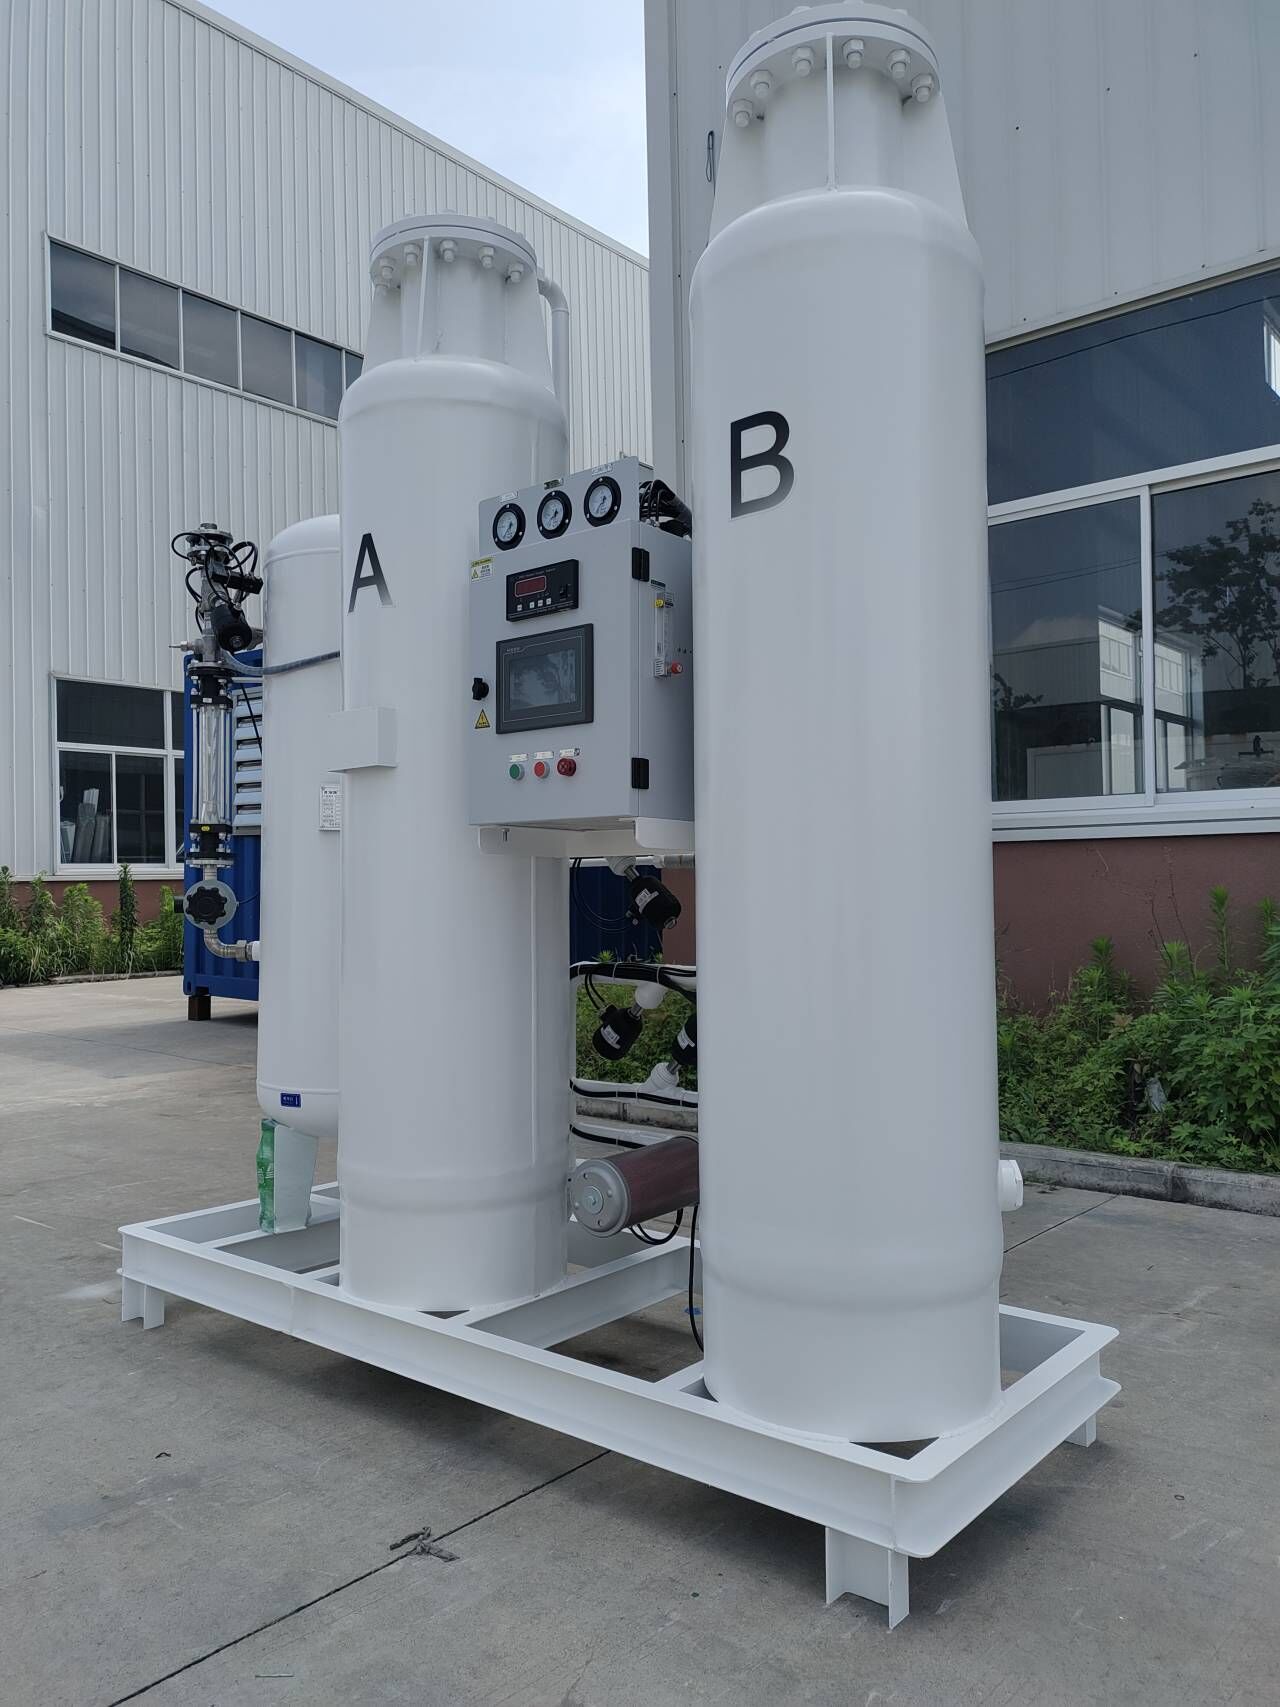 Agricultural industry Oxygen concentrator indoor aerobic aquaculture ozone generator oxygen production equipment